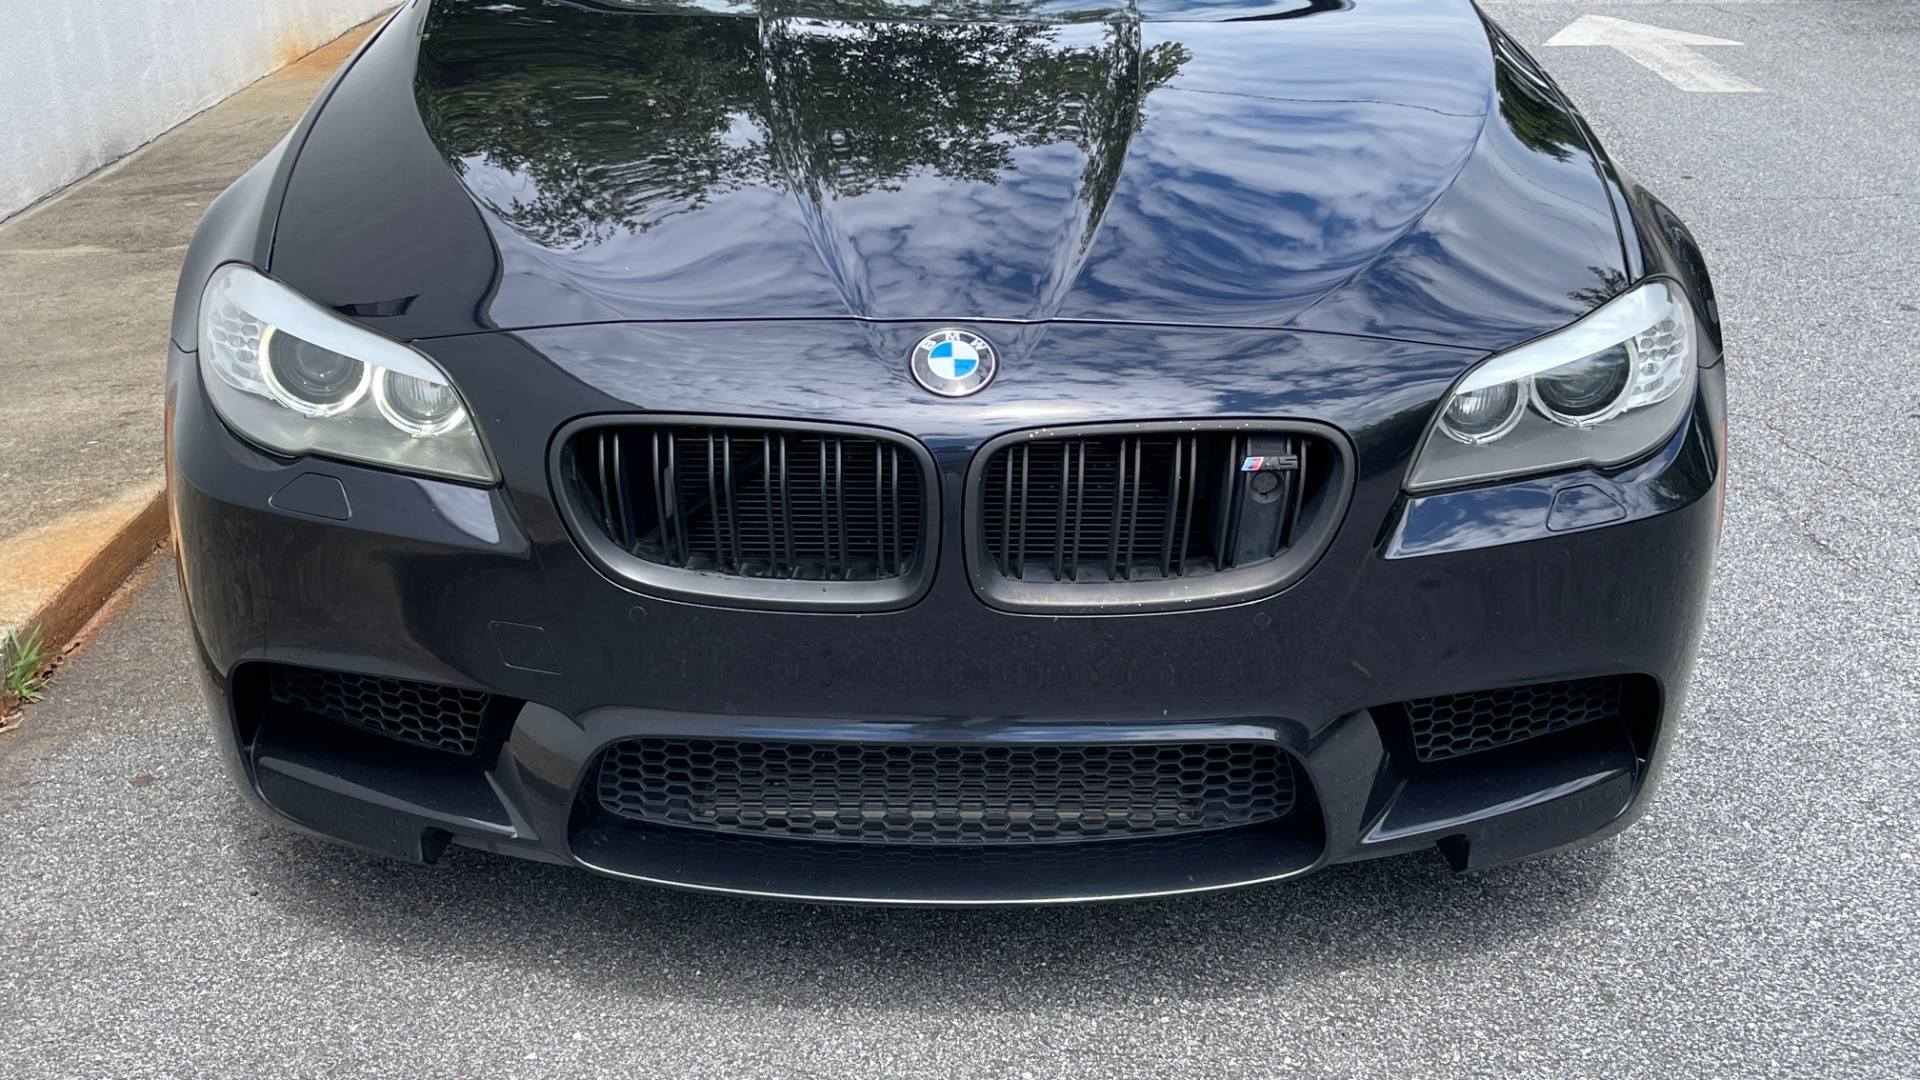 Used 2013 BMW M5 EXECUTIVE PKG / DRVR ASST / NAV / SUNROOF / REARVIEW for sale Sold at Formula Imports in Charlotte NC 28227 4